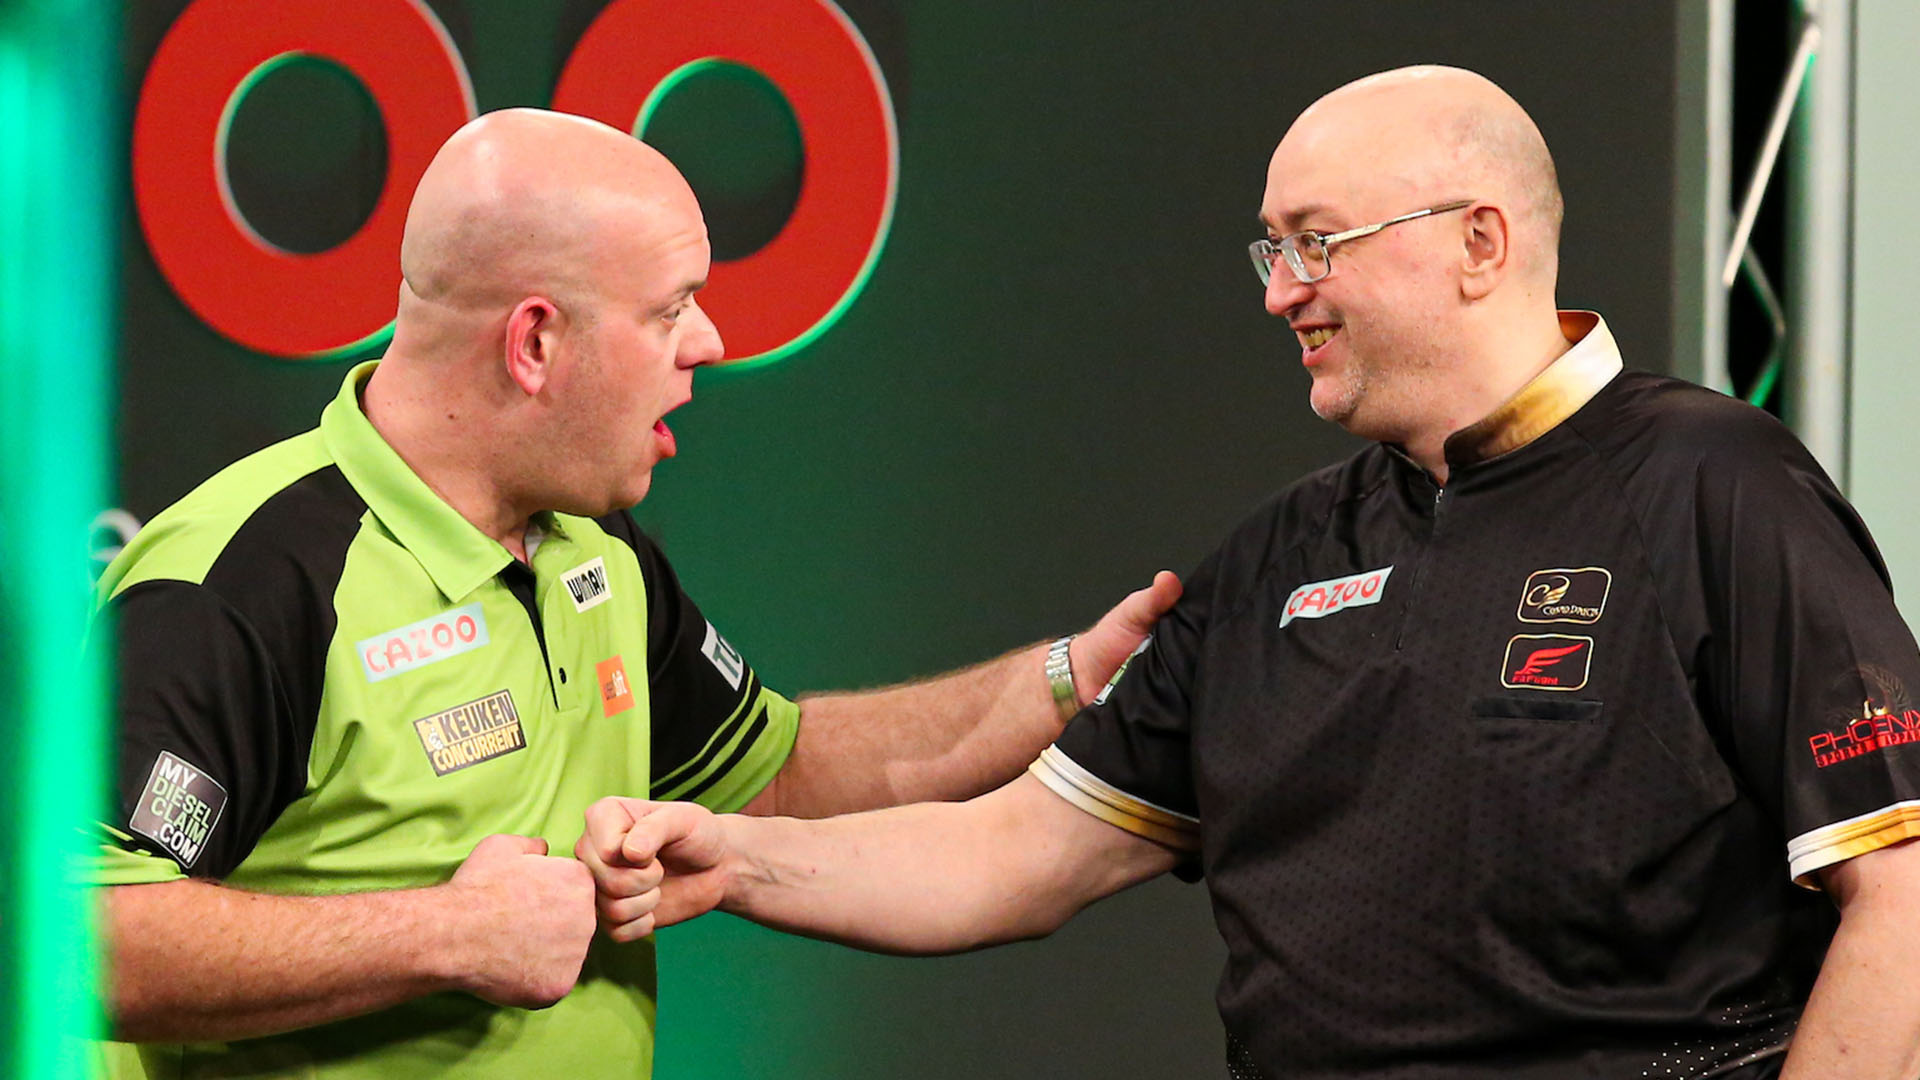 Darts results Andrew Gilding stuns Michael van Gerwen in UK Open final to win his first major at the age of 52